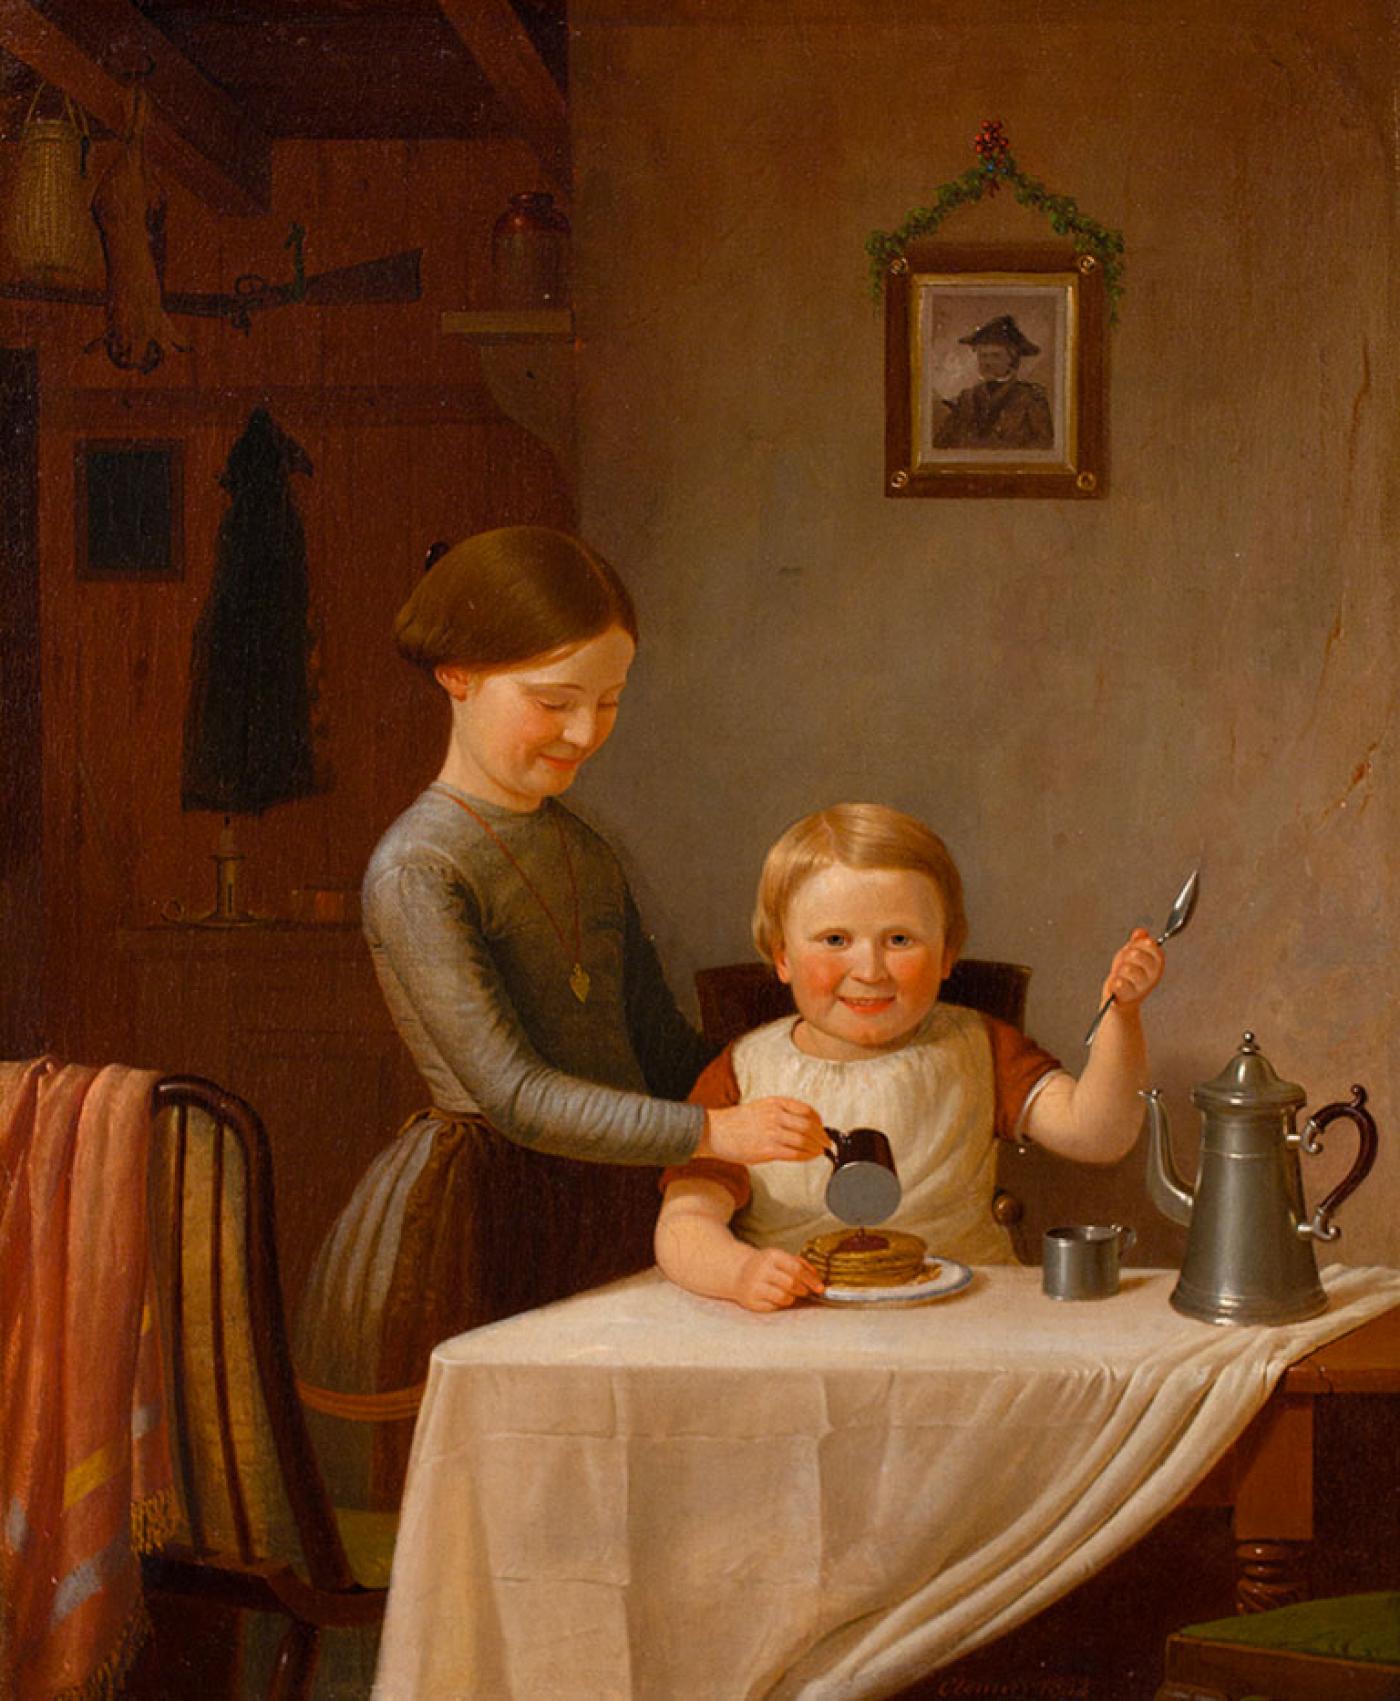 A Good Breakfast by James Goodwyn Clonney - 1852 - 43.2 x 35.6 cm private collection